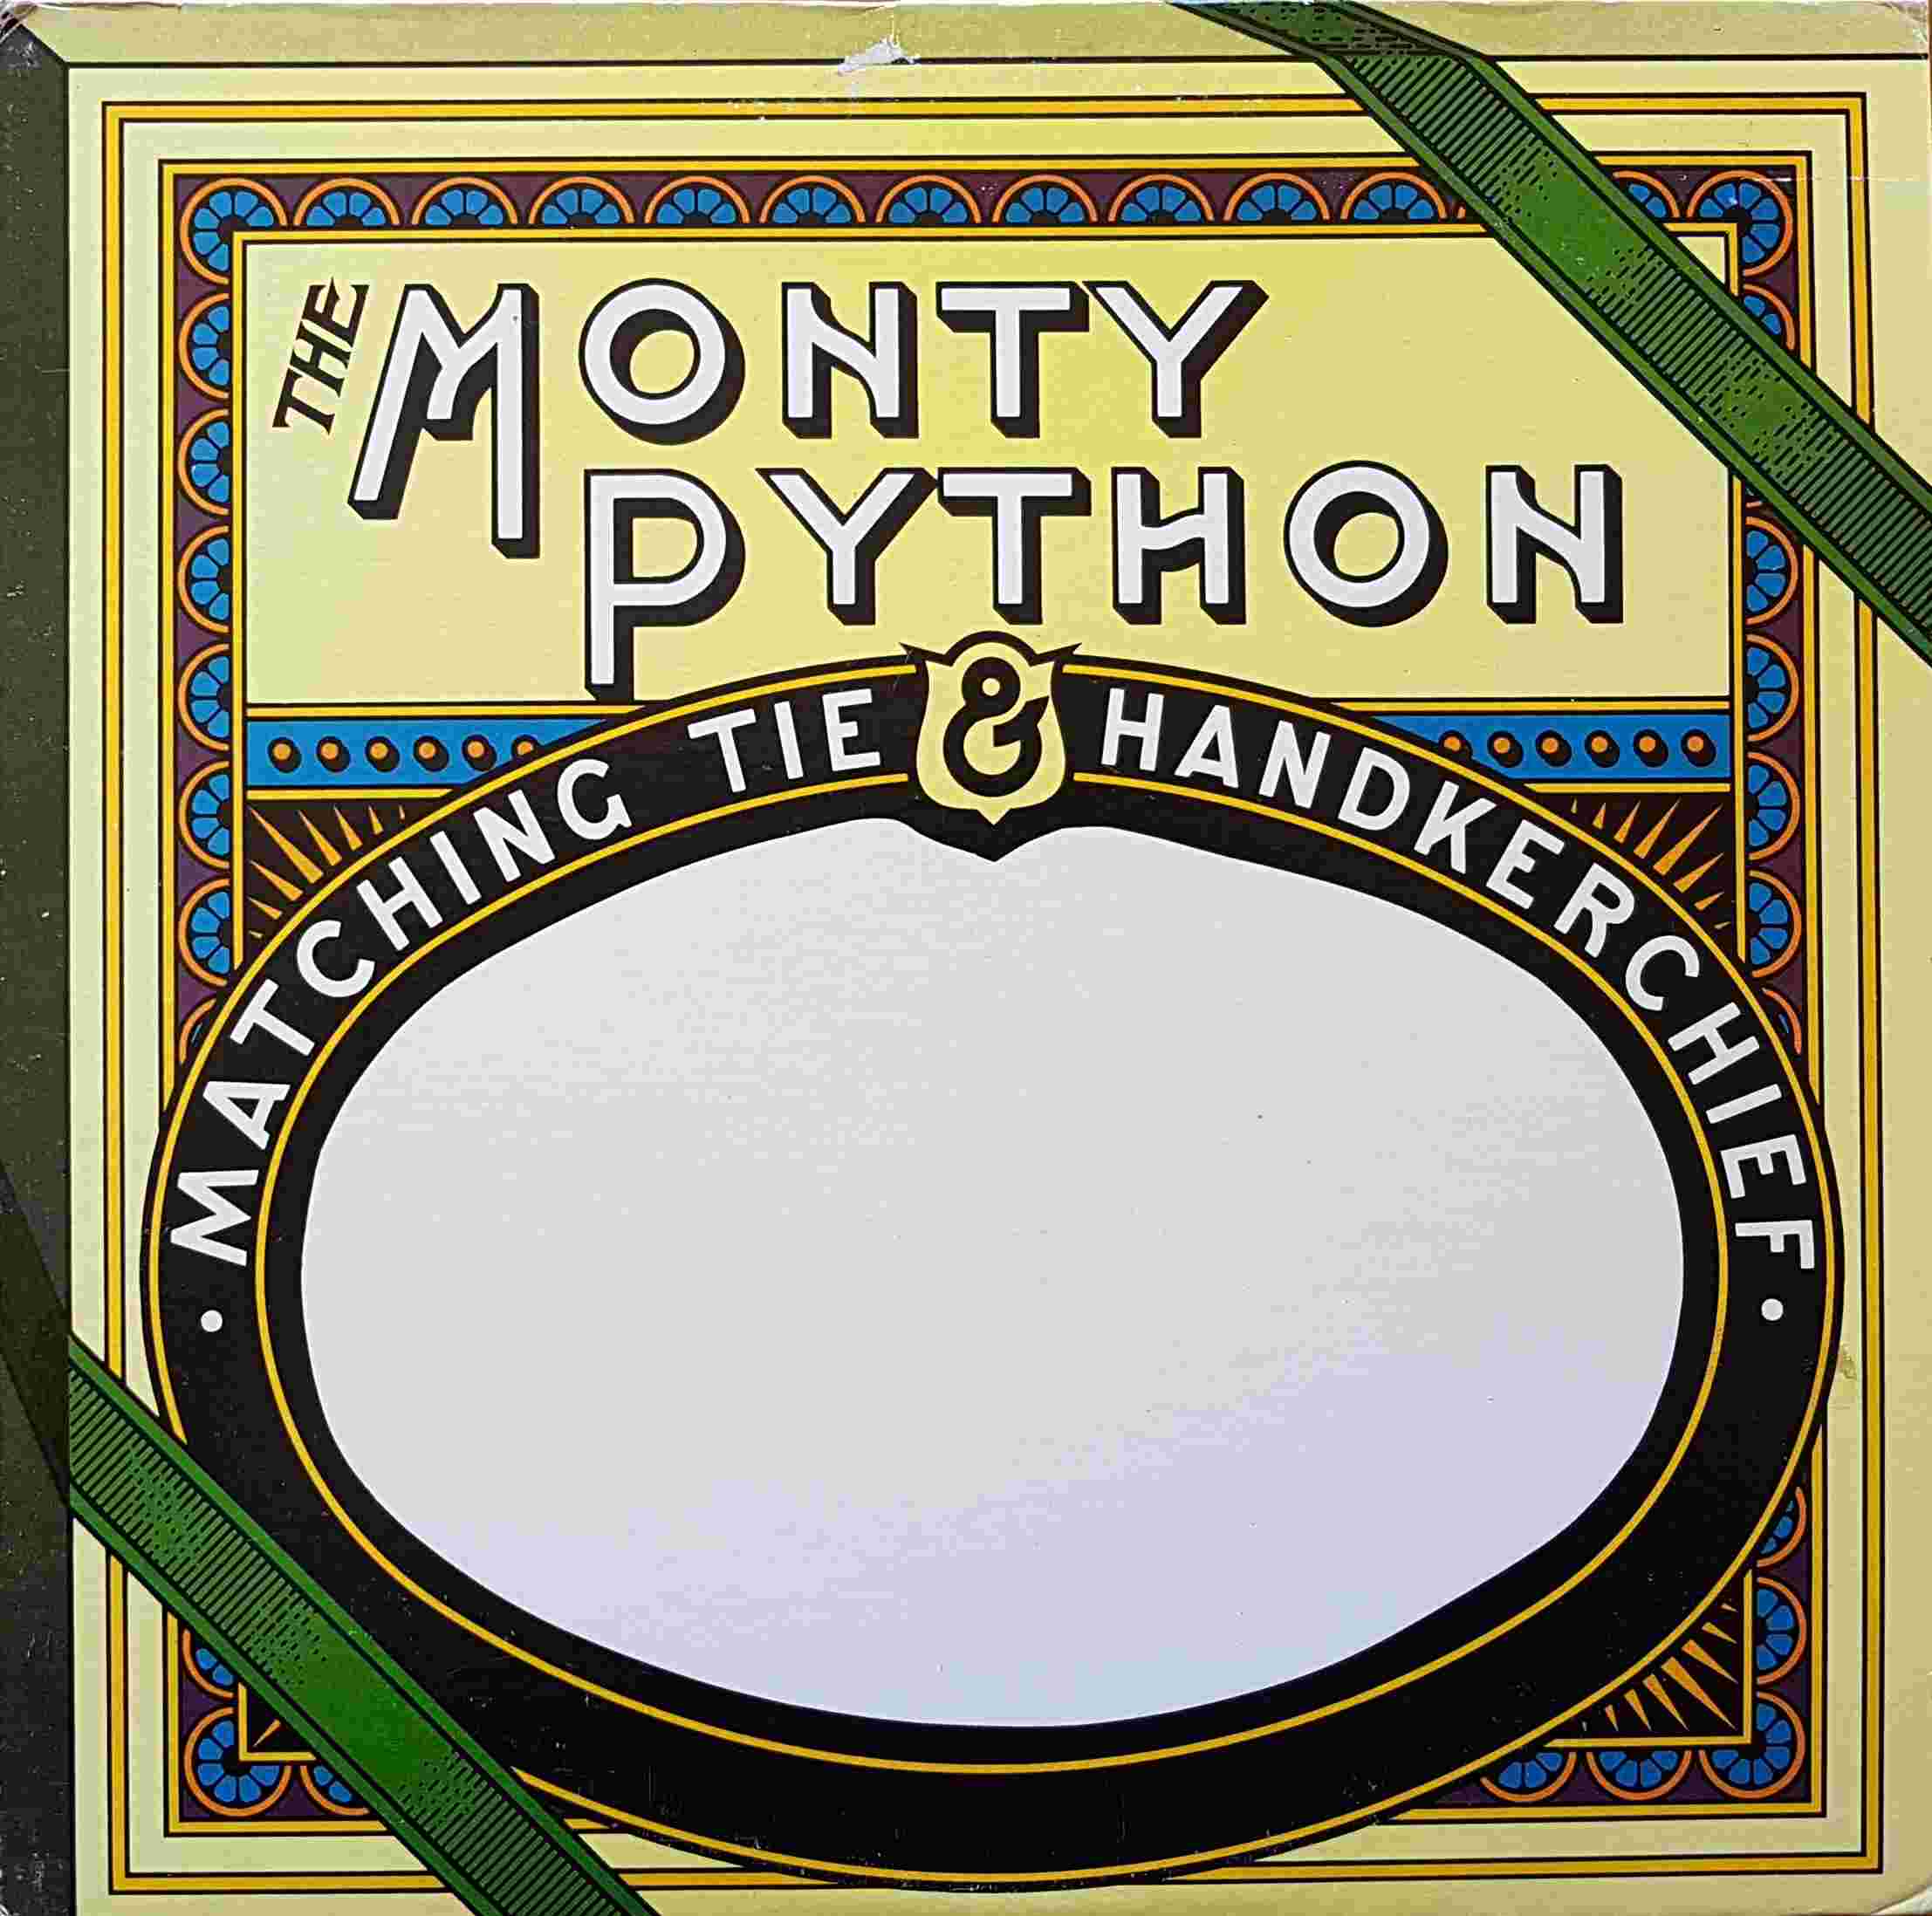 Picture of Matching tie and handkerchief by artist Monty Python from the BBC albums - Records and Tapes library